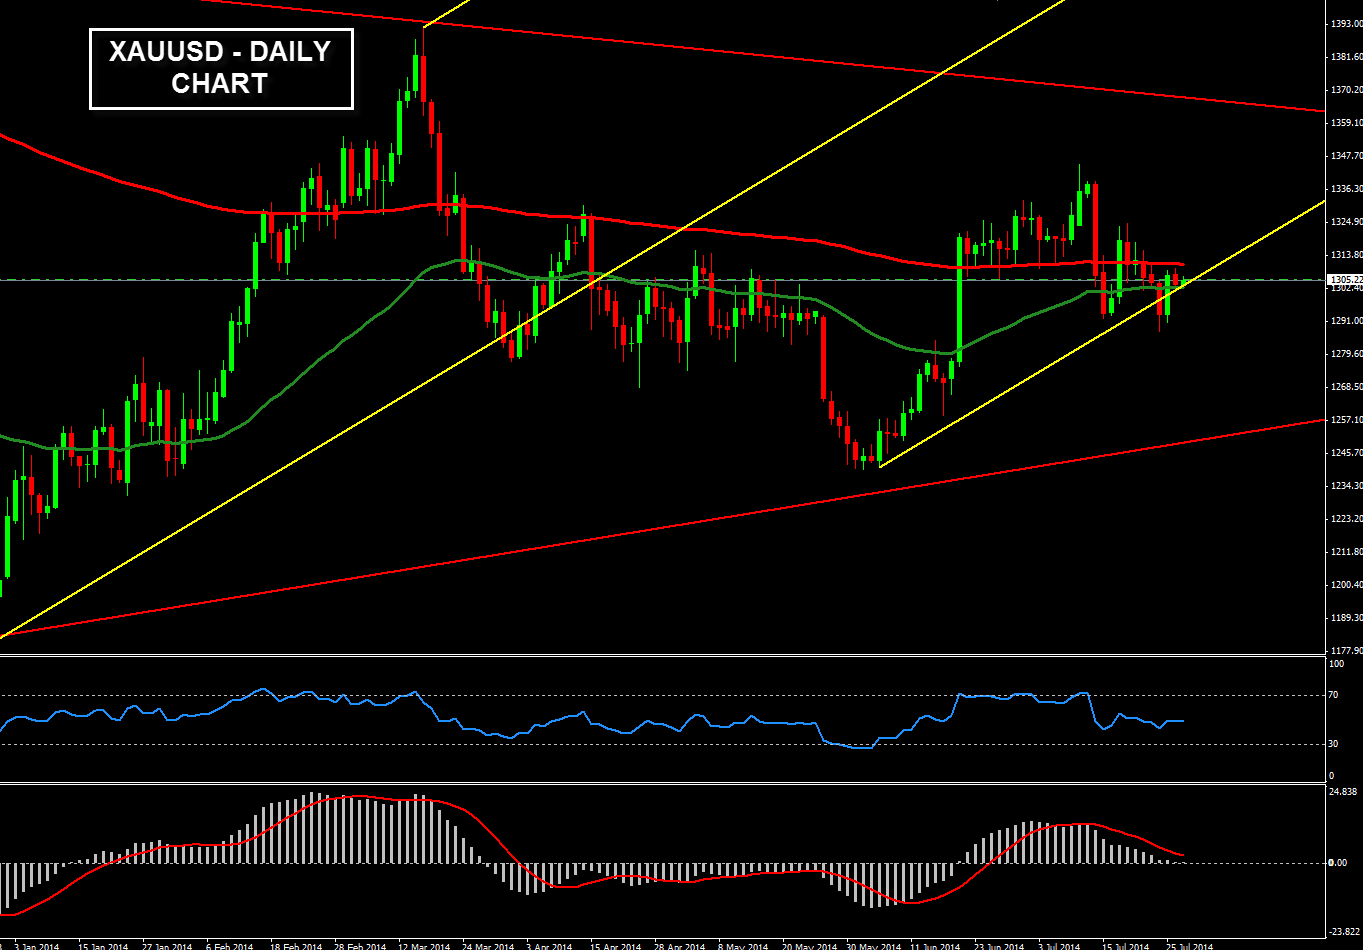 Forex Technical Analysis of XAUUSD for July 29, 2014 | Forex Signals Market